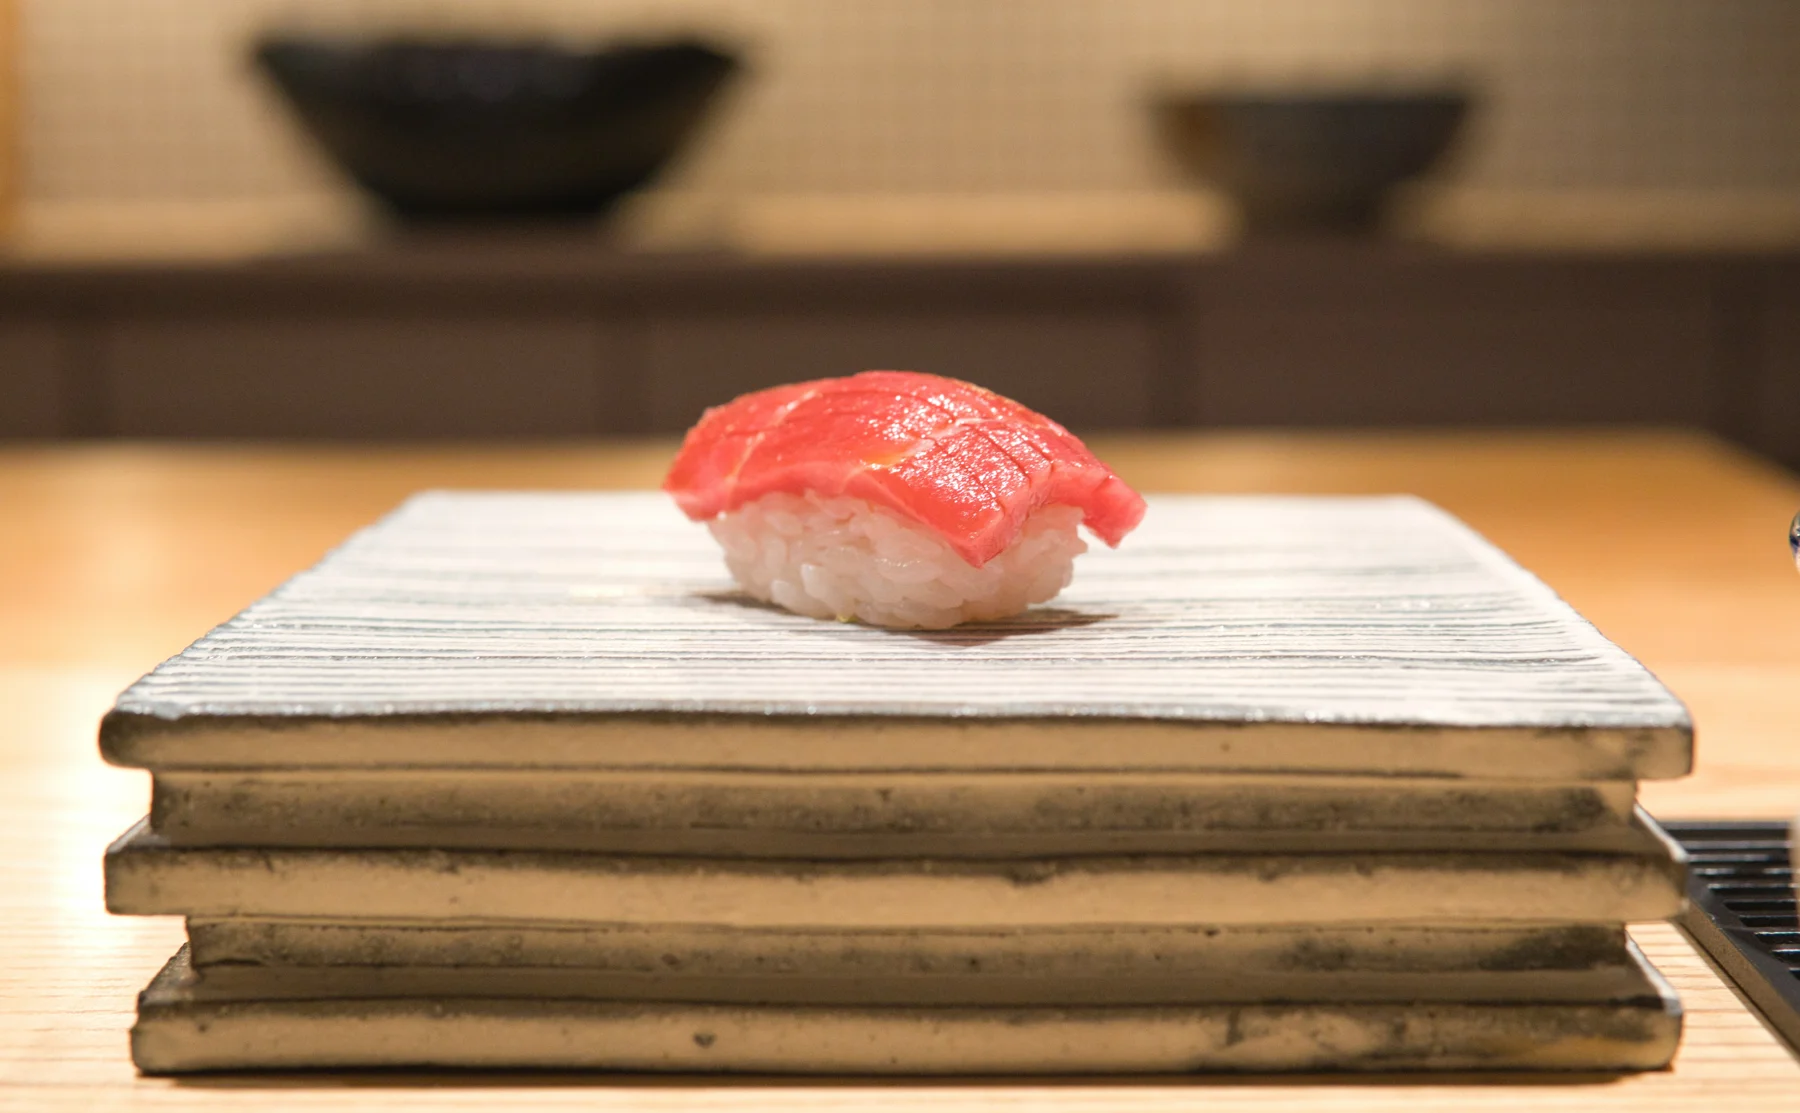 OMAKASE (お任せ)TRADITIONAL SUSHI EXPERIENCE  - 1442694